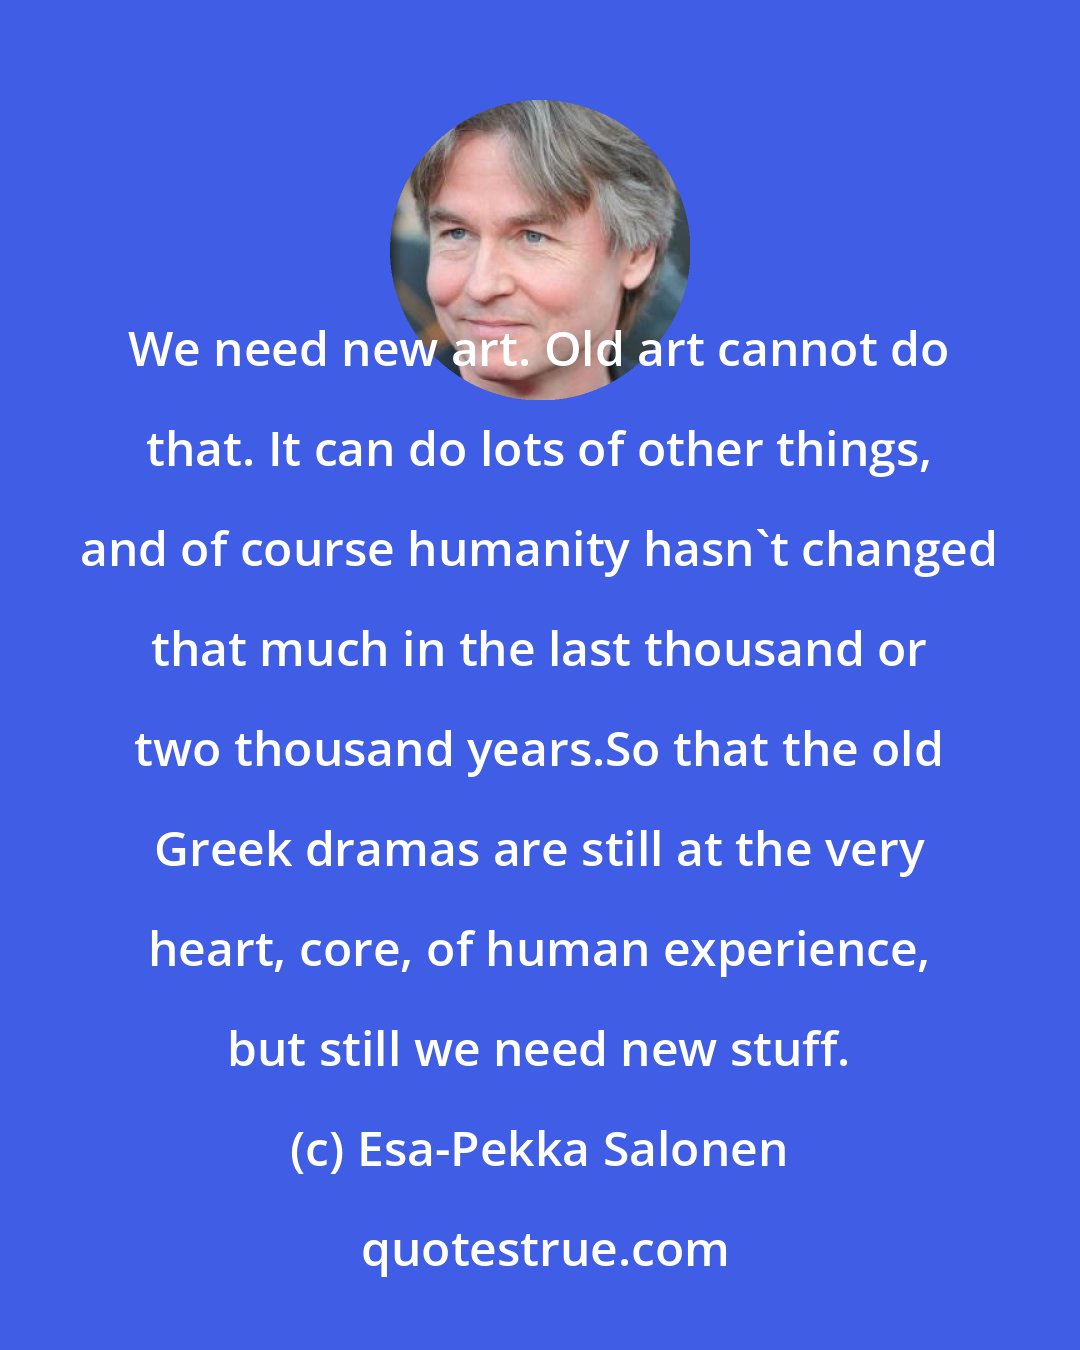 Esa-Pekka Salonen: We need new art. Old art cannot do that. It can do lots of other things, and of course humanity hasn't changed that much in the last thousand or two thousand years.So that the old Greek dramas are still at the very heart, core, of human experience, but still we need new stuff.